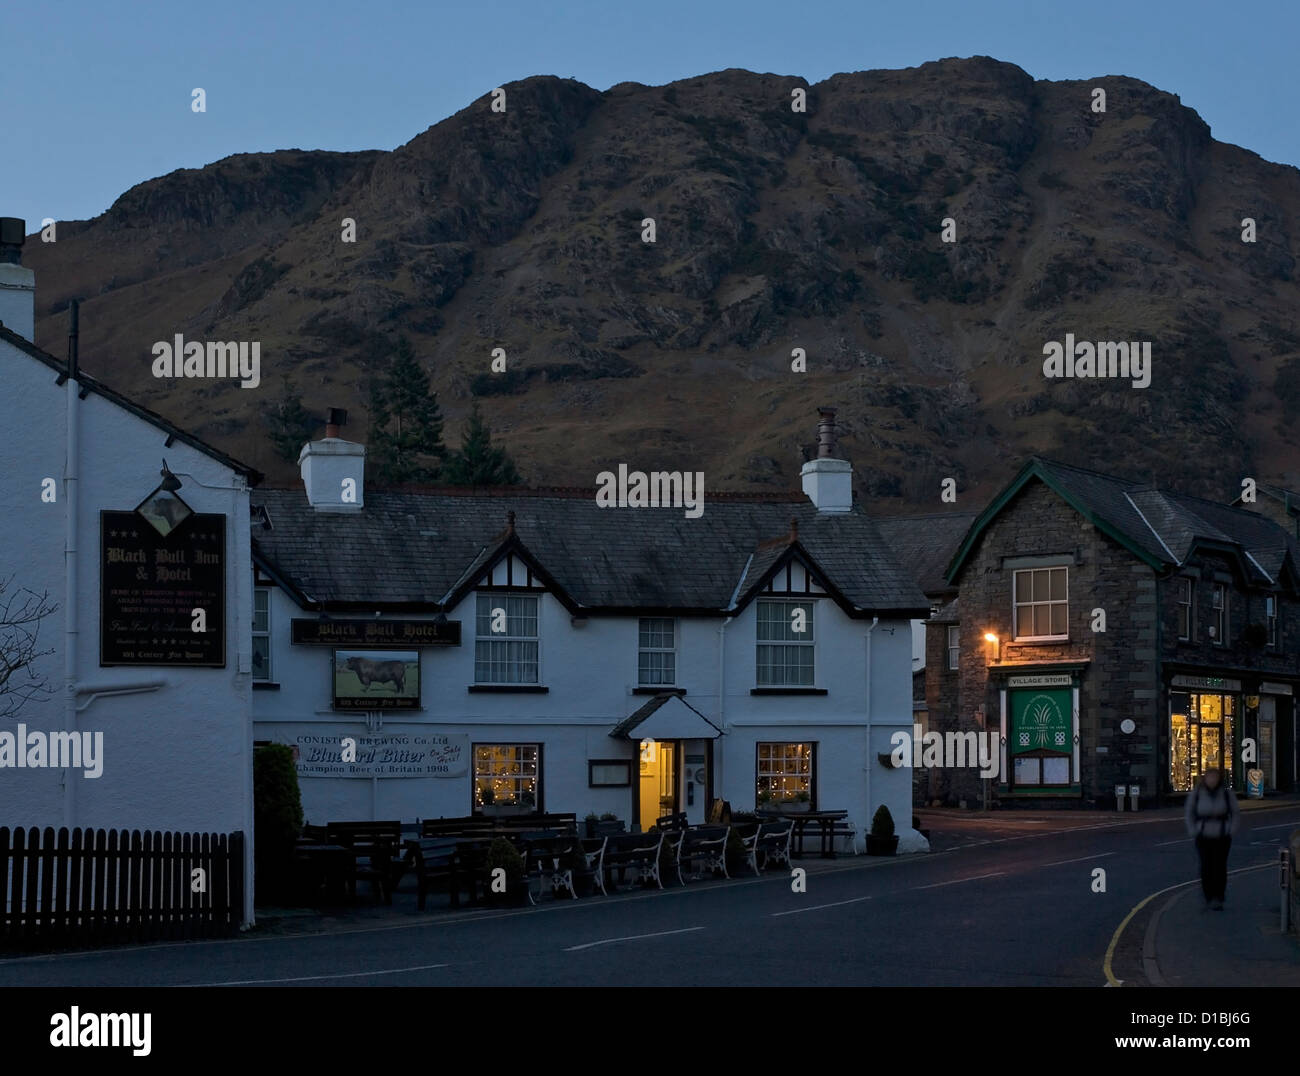 The Black Bull Inn & Hotel in the village of Coniston, Lake District National Park, Cumbria, England UK Stock Photo